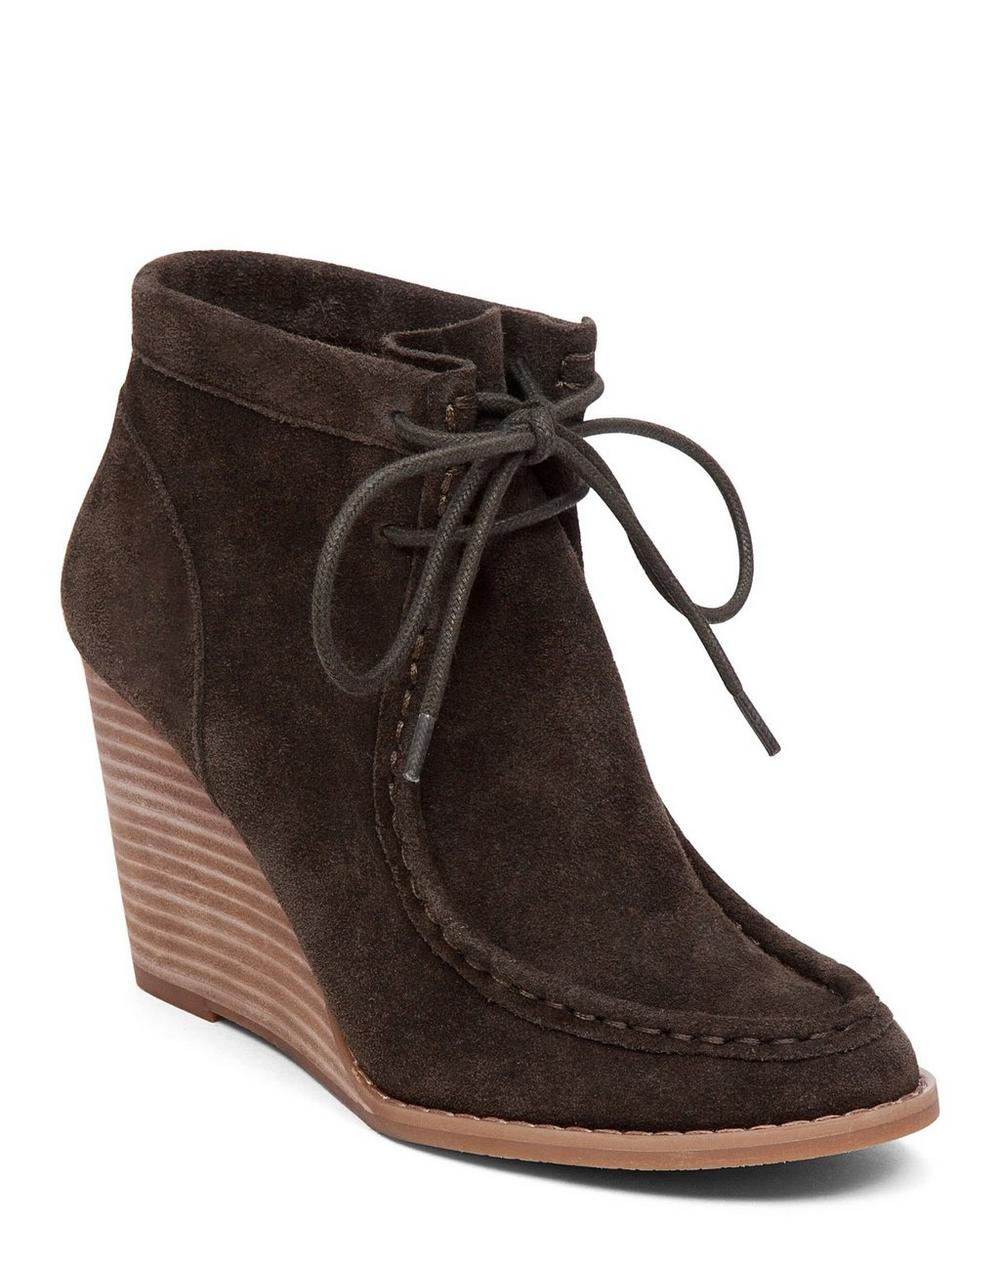 Lucky Brand Women's Sesame Tan Ysabel Lace Up Wedge Bootie Shoes Ret $129 New 